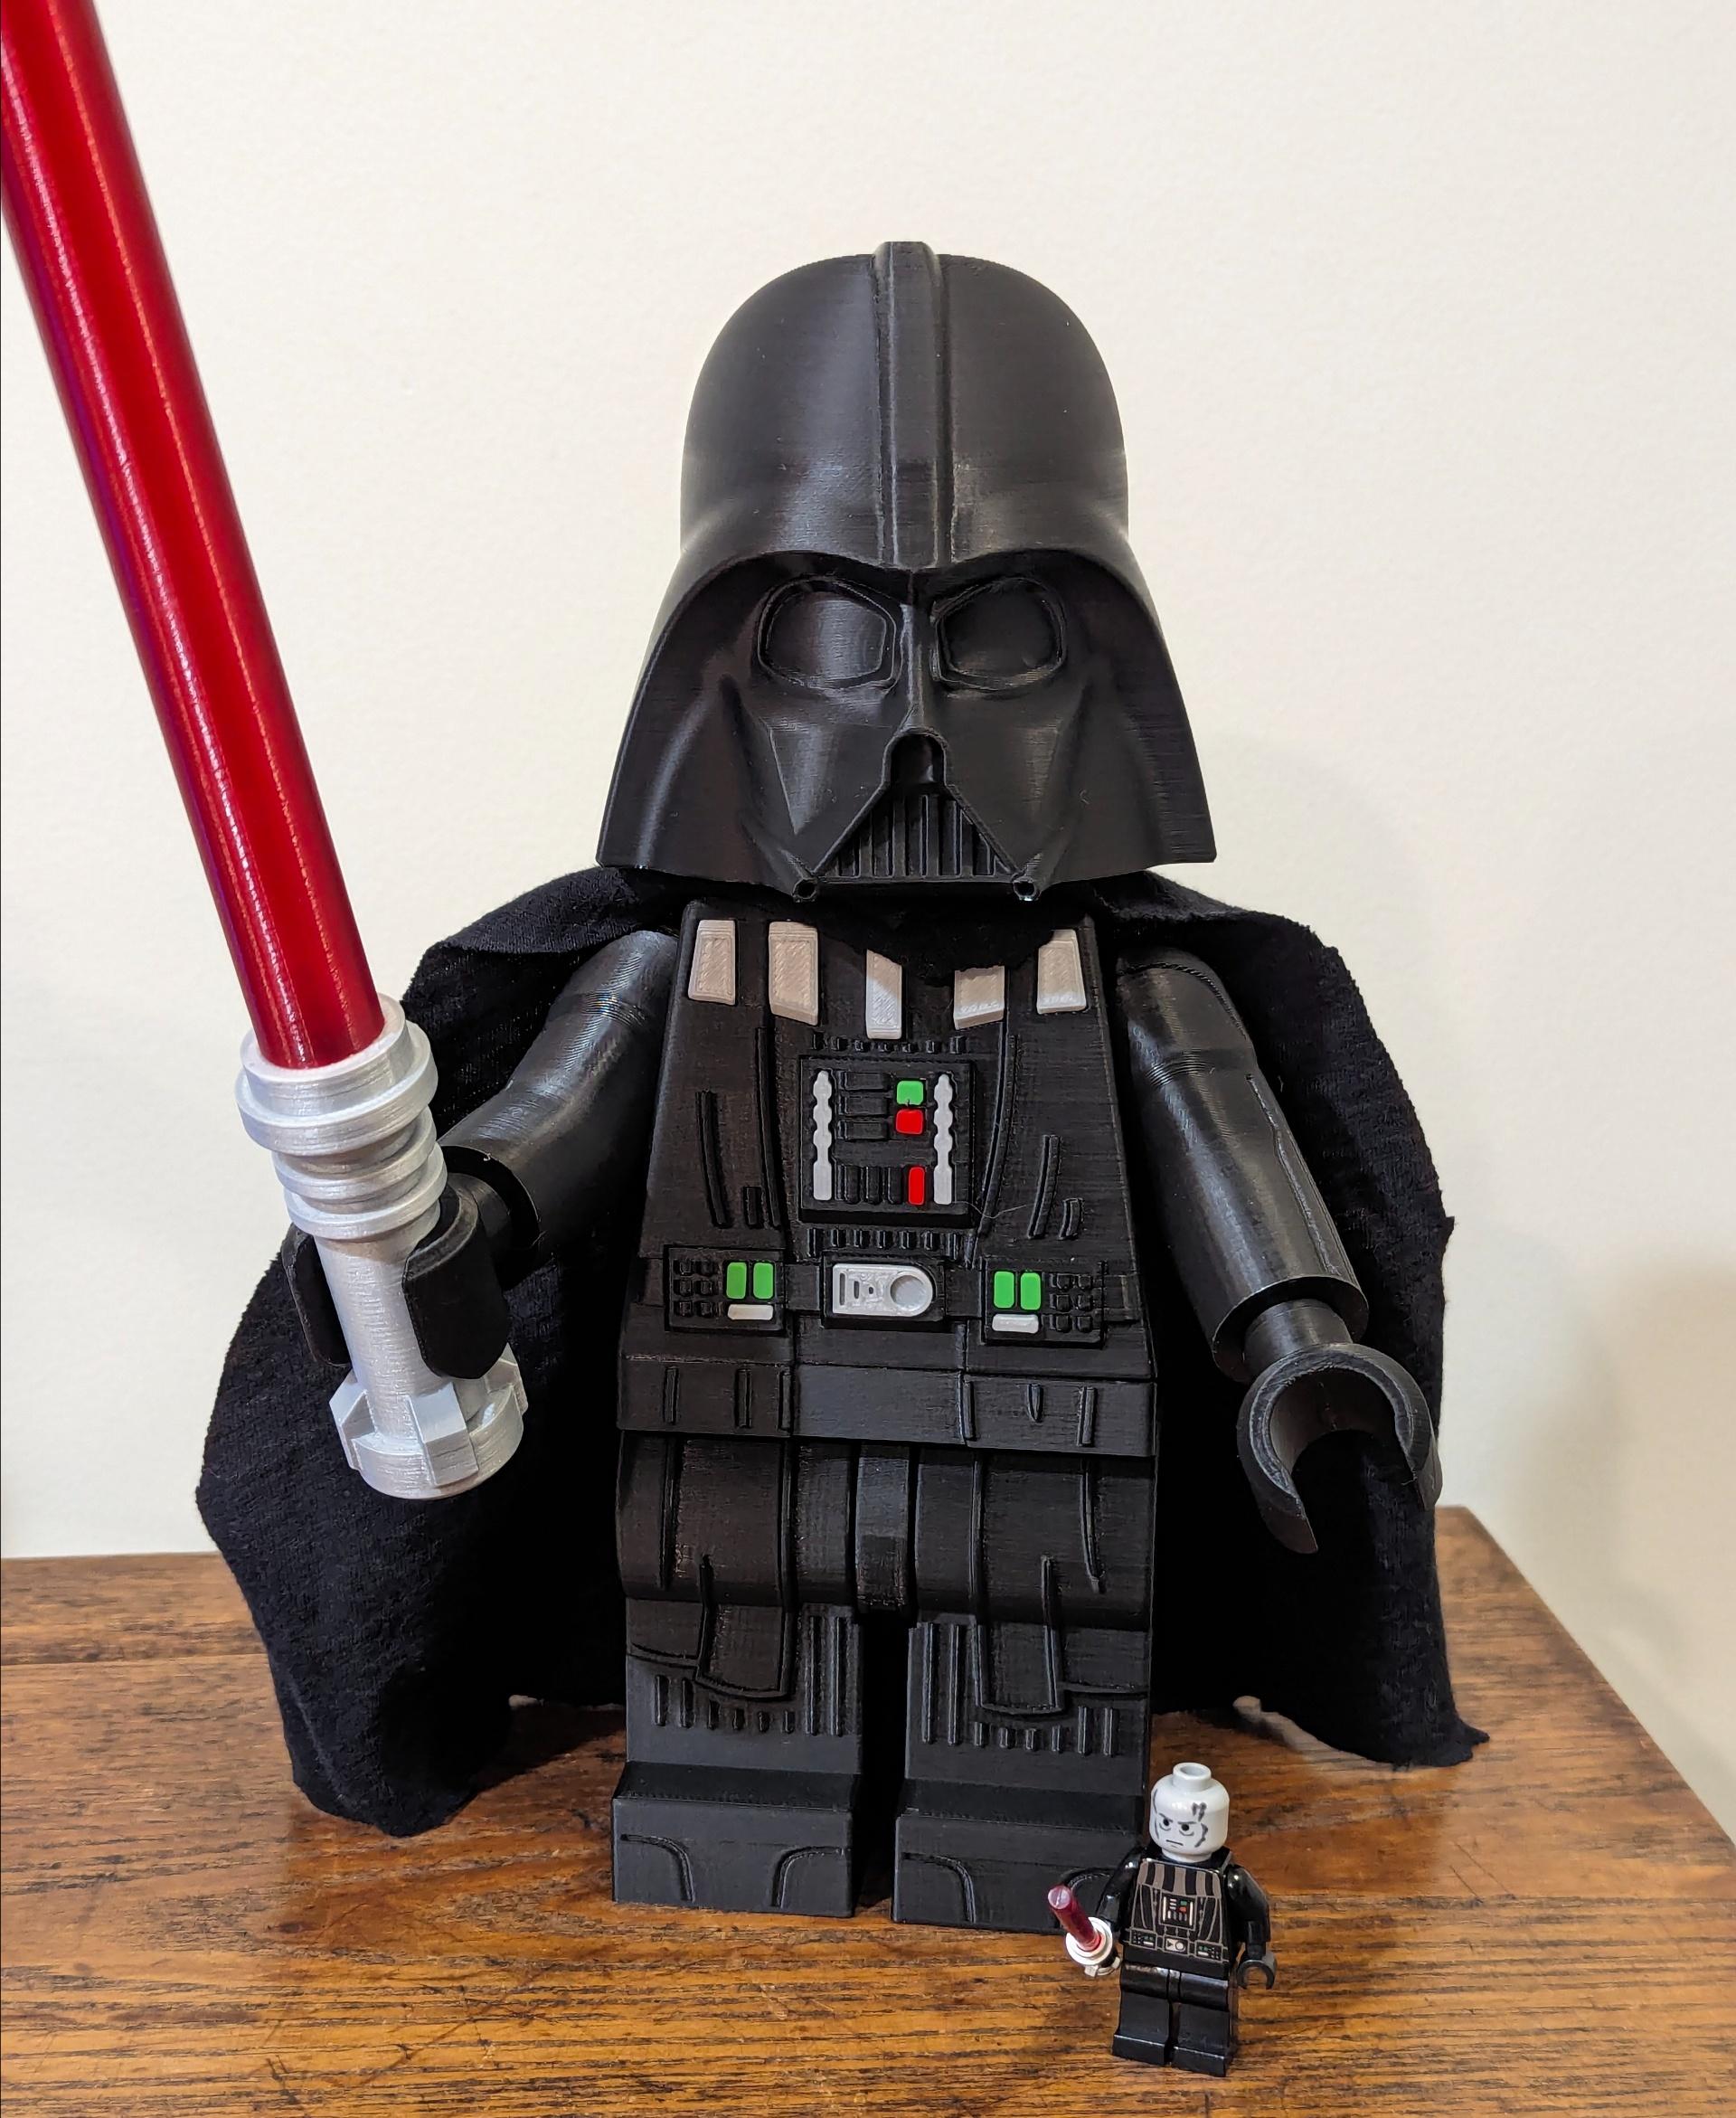 Darth Vader (6:1 LEGO-inspired brick figure, NO MMU/AMS, NO supports, NO glue) - Printed in
Printed Solid Black and Green
Polymaker Metallic Silver 
Prusament Lipstick Red
Coex Translucent Blood Red - 3d model